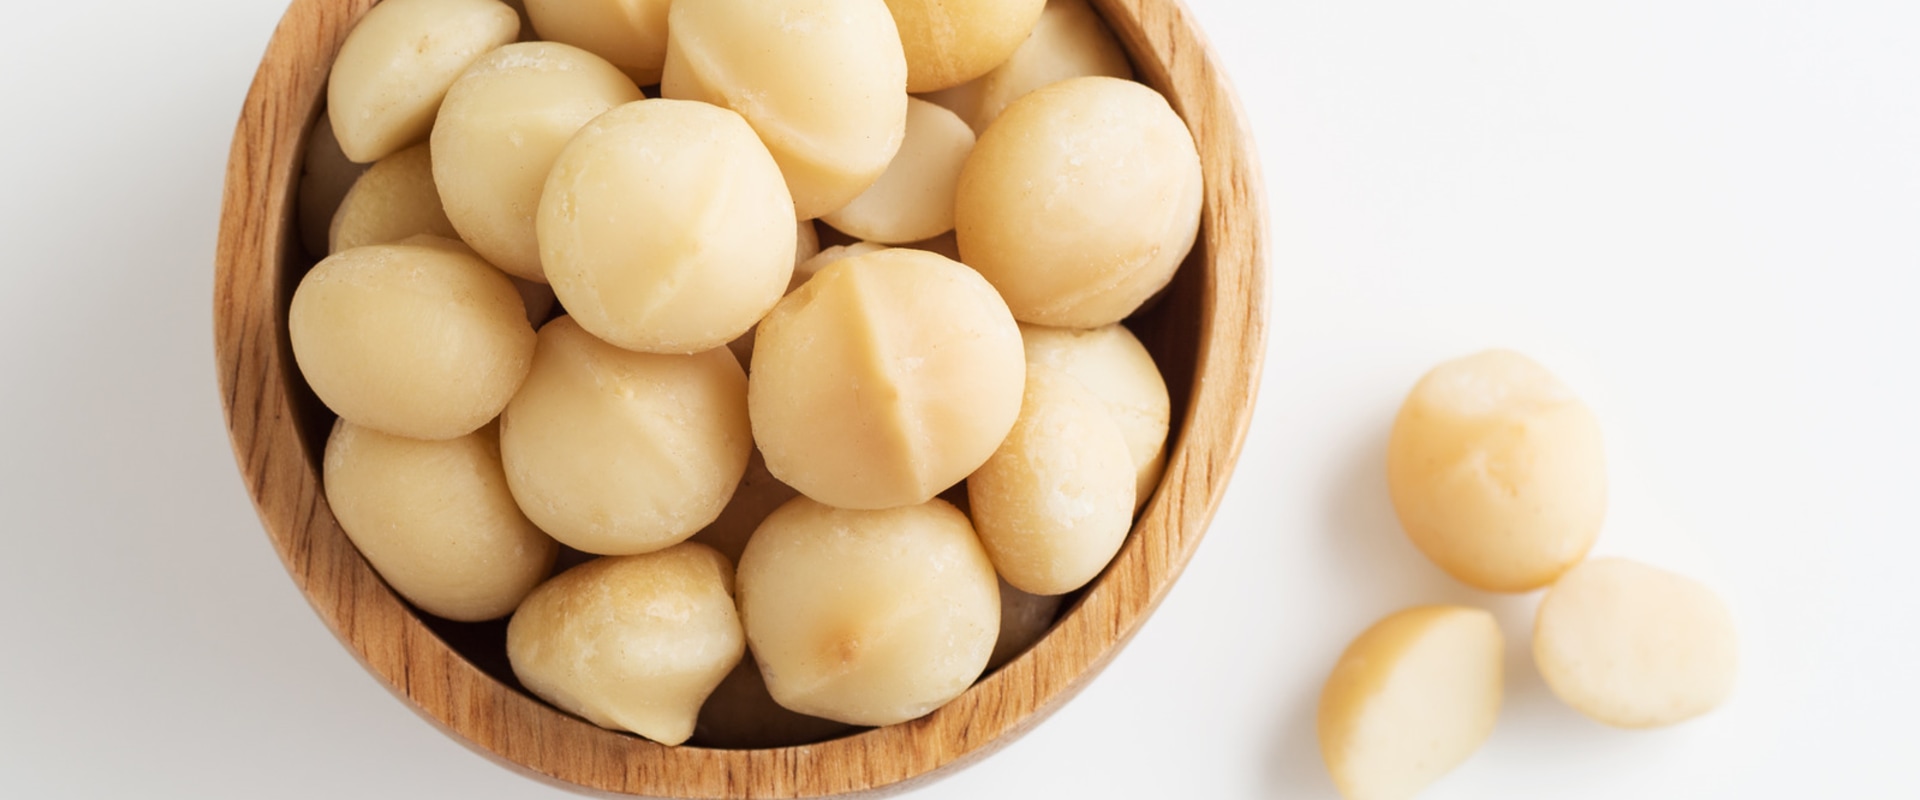 Are macadamia nuts better raw or roasted?